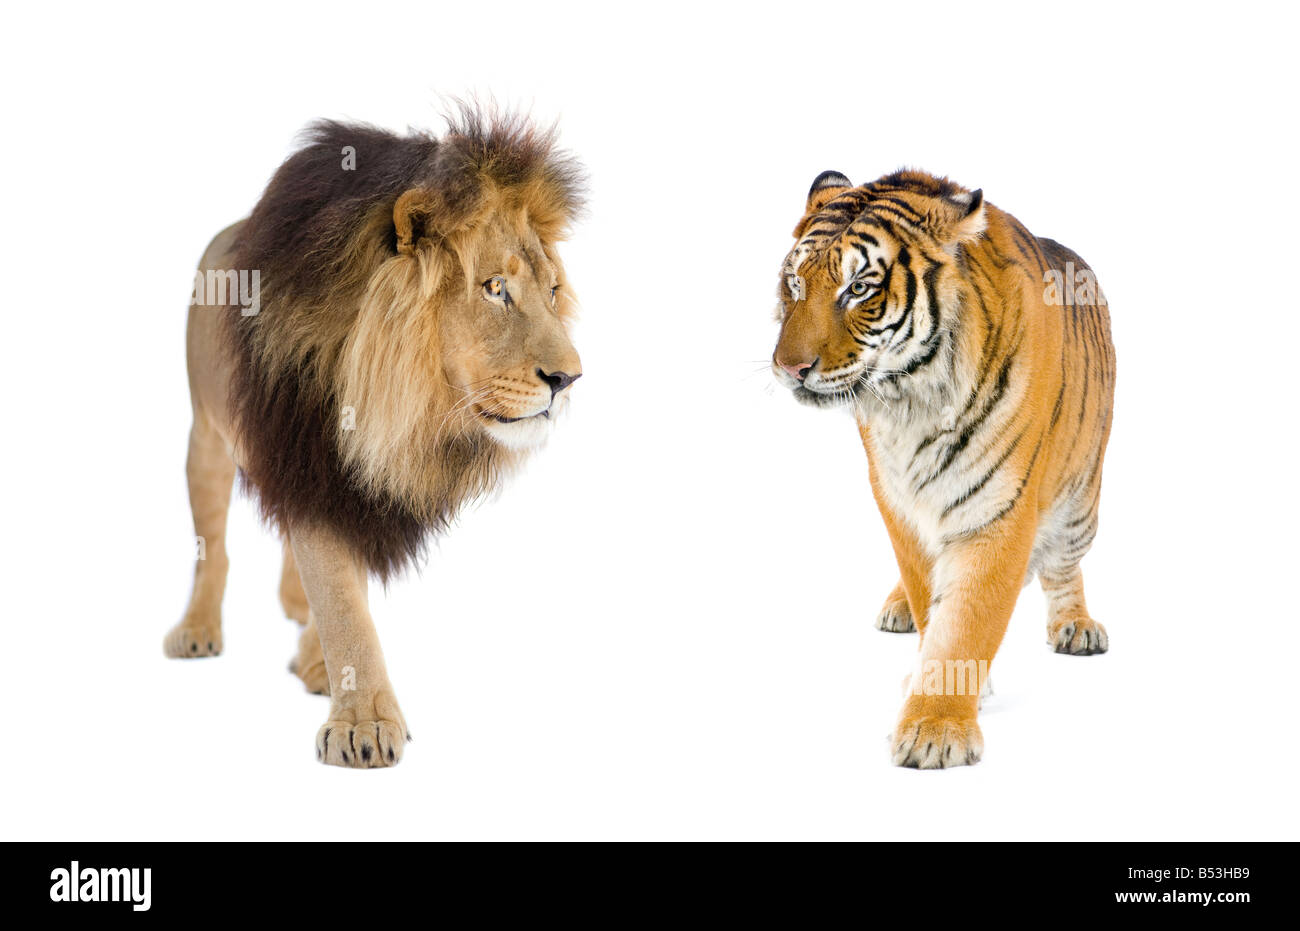 Lion And Tiger In Front Of A White Background Stock Photo Royalty